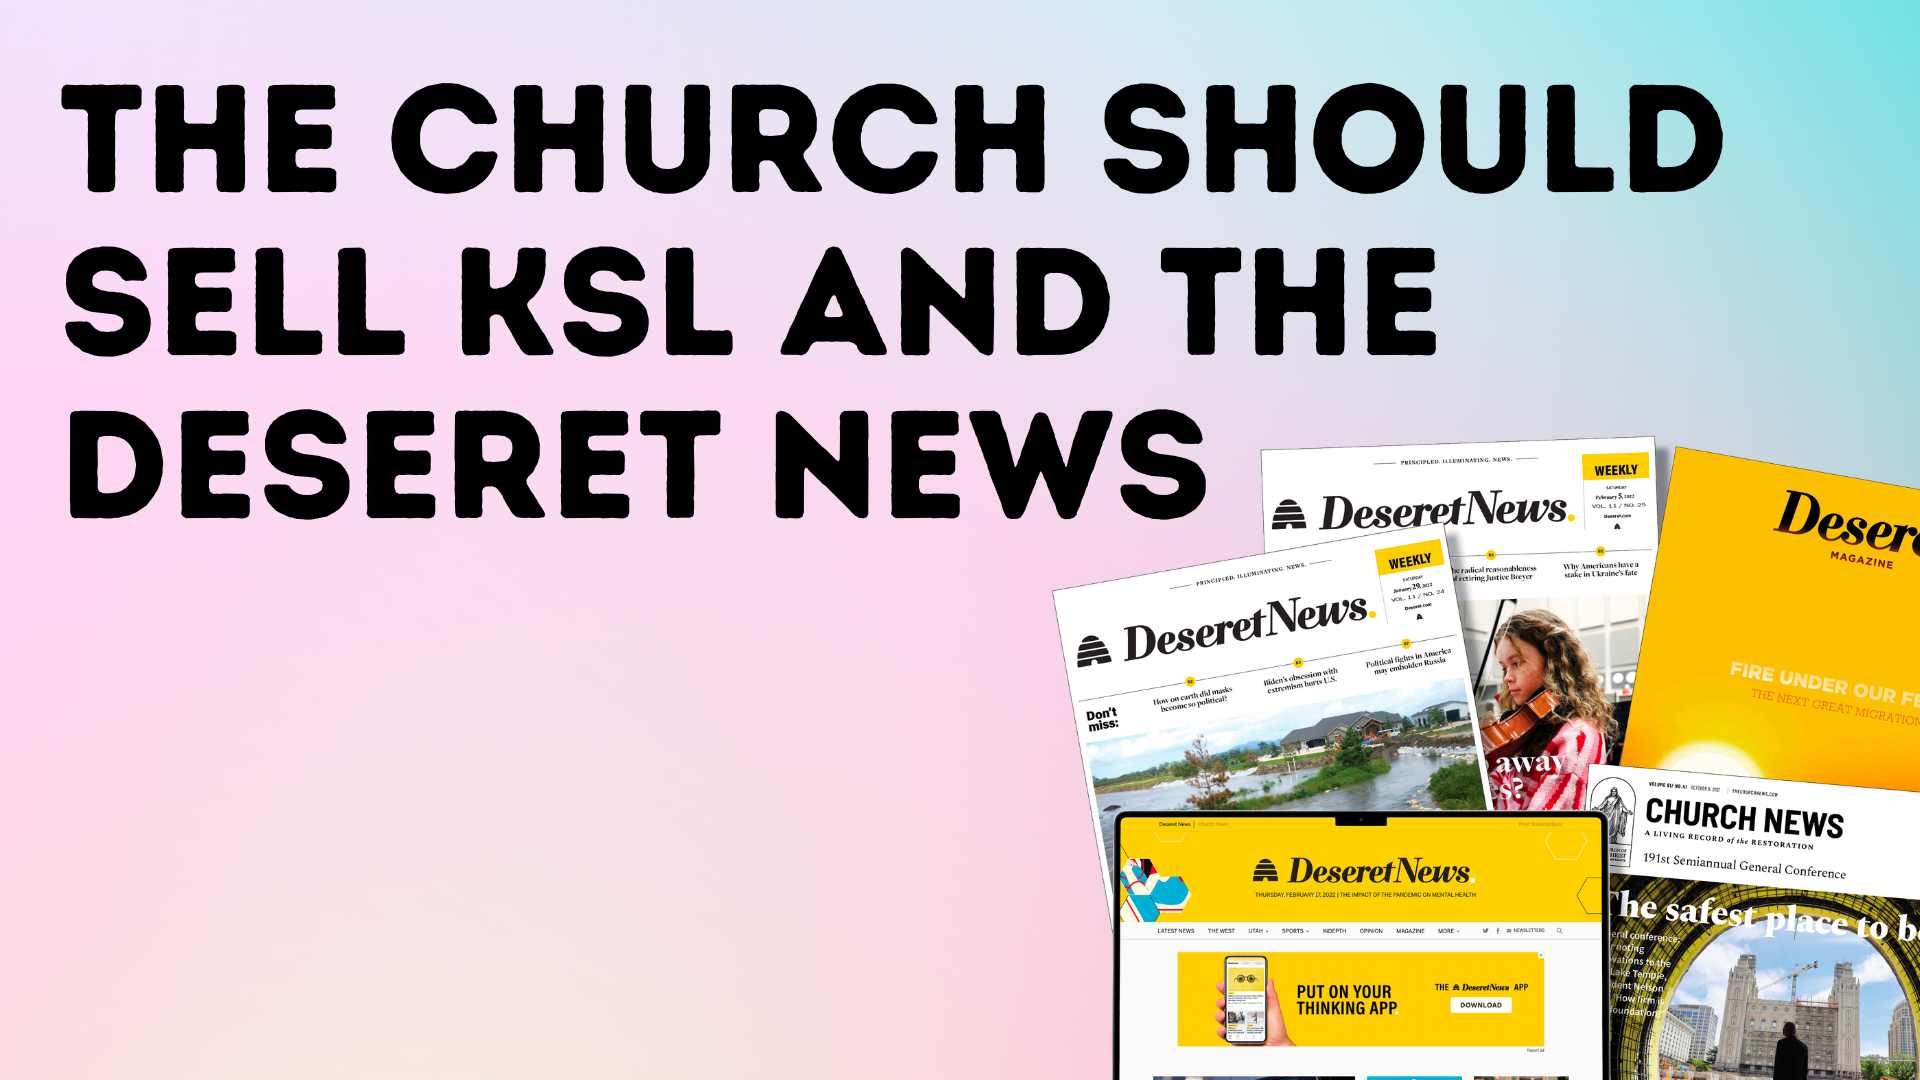 The Church Should Sell KSL and the Deseret News